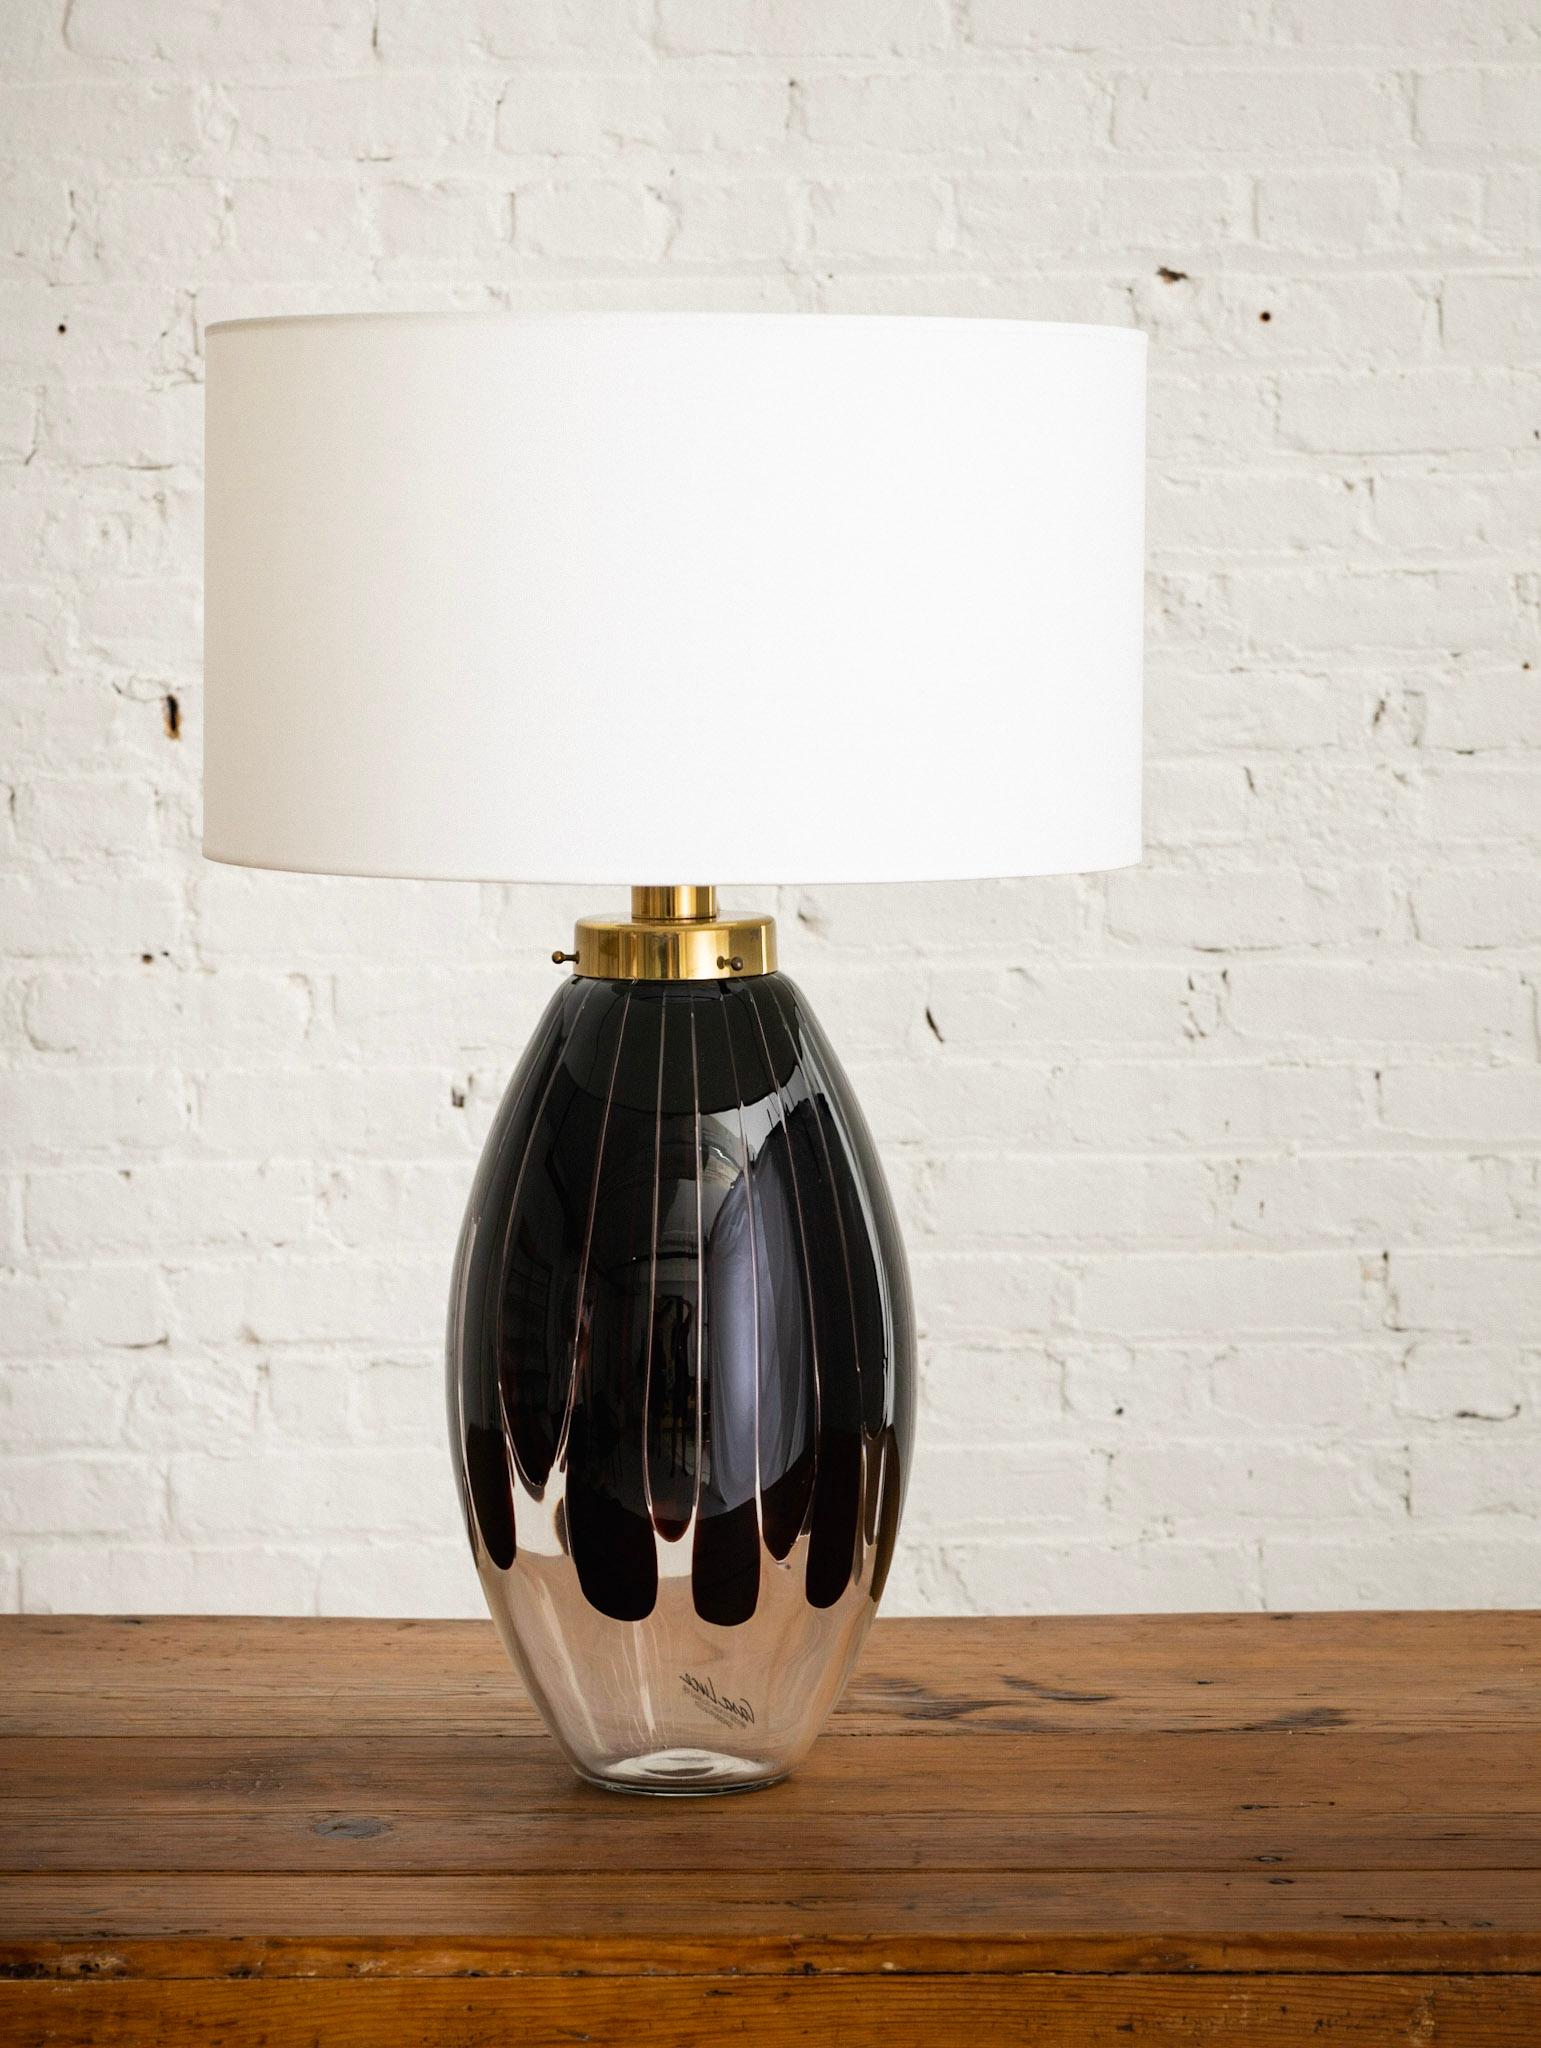 An Italian table lamp made by Casa Luce for Scandinavian Gallery. Transparent glass with a dark amber/molasses color drop forms. Brass hardware. Lamp features both an upper and inner light source. The inner light casts an elegant shadow pattern when